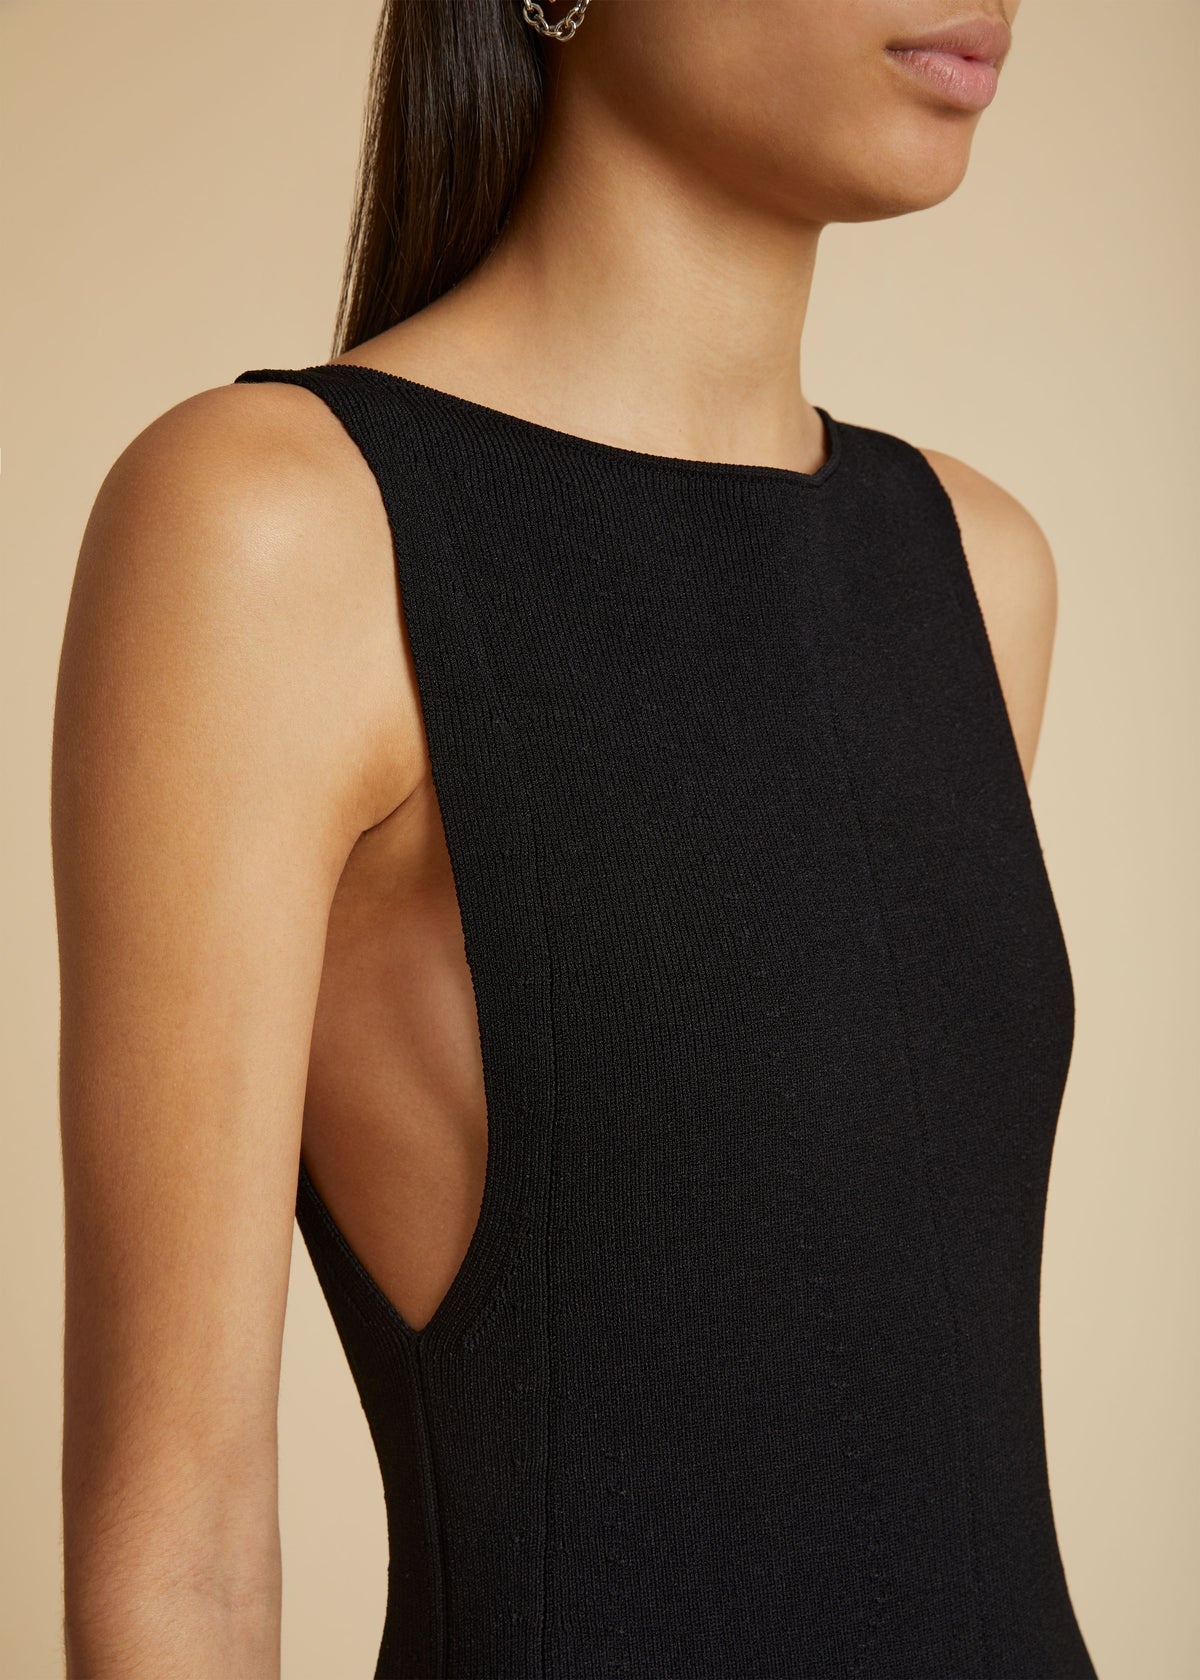 The Evelyn Dress in Black - 4